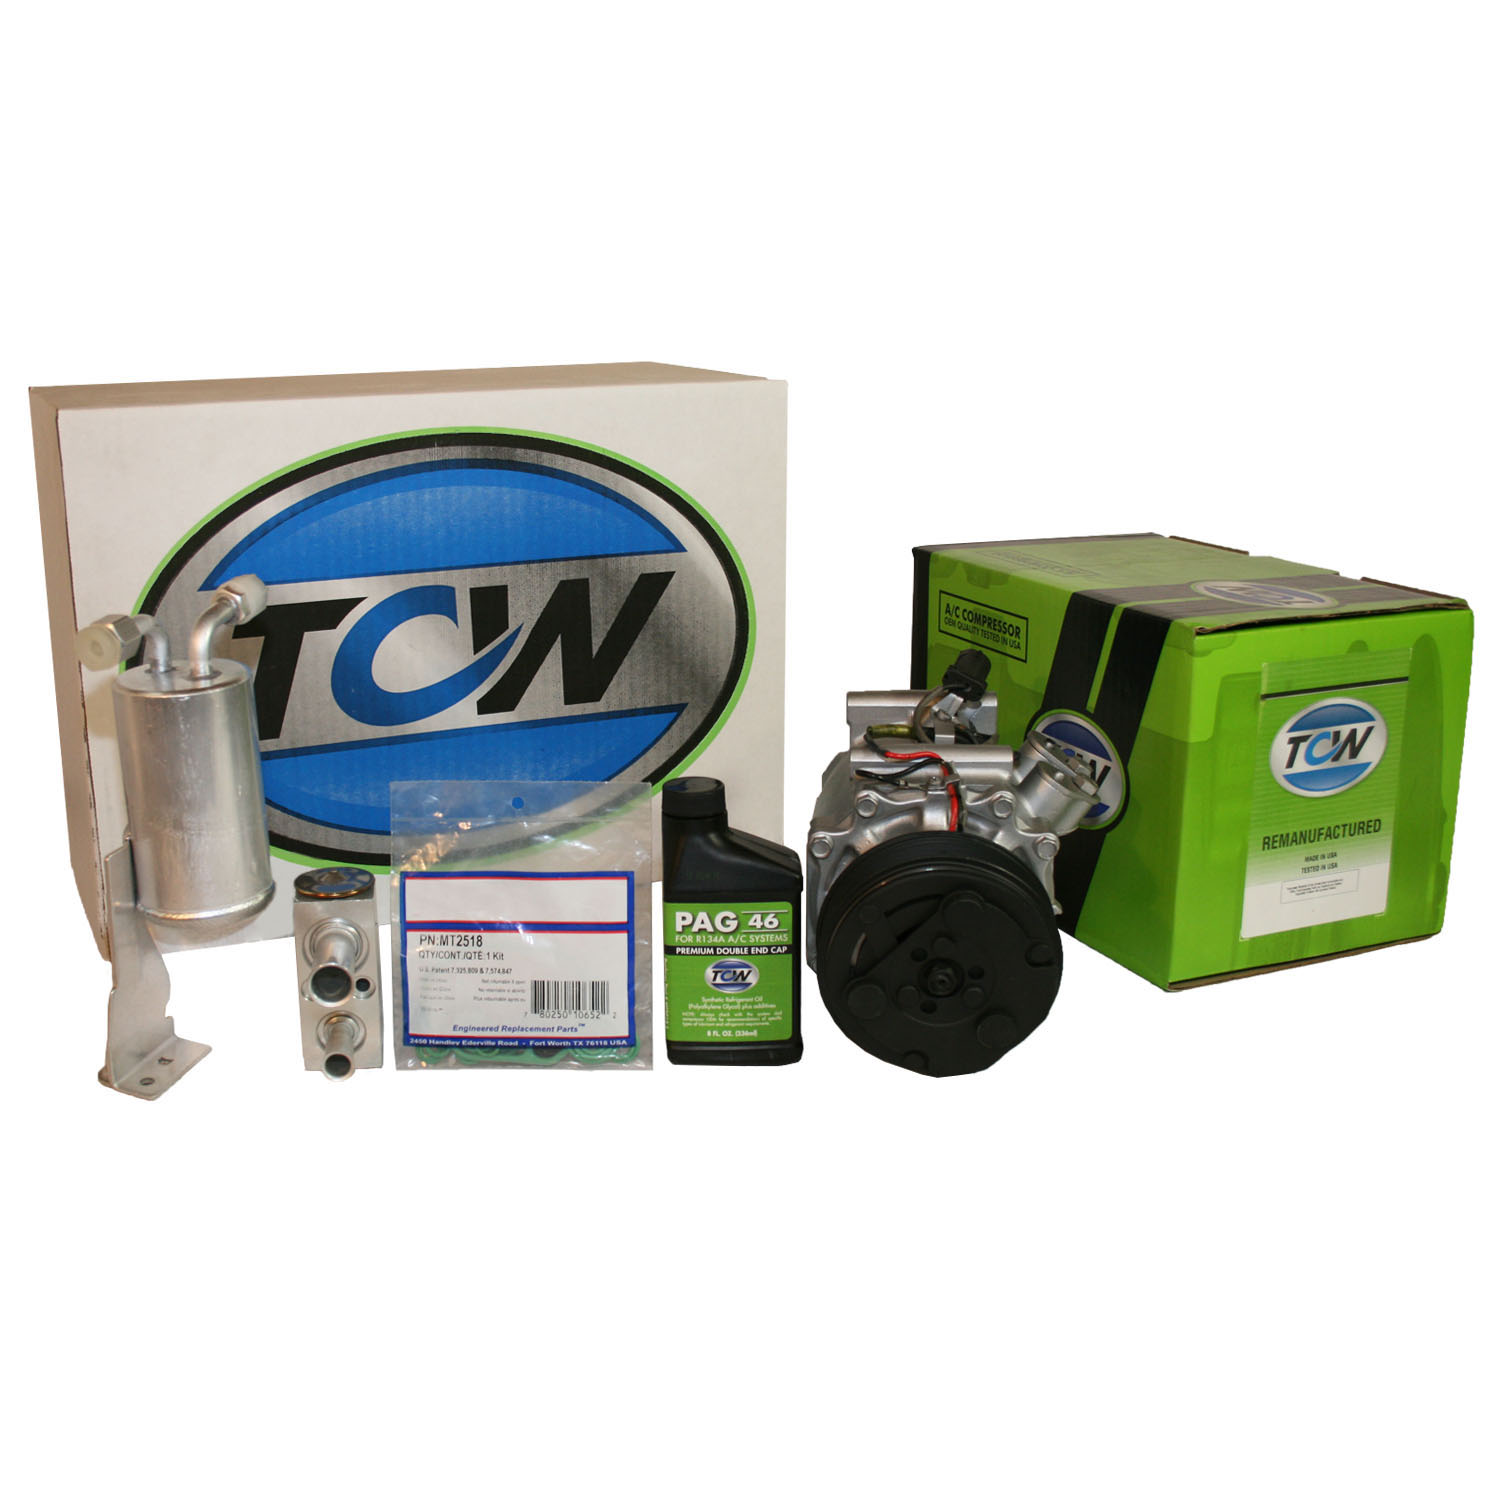 TCW Vehicle A/C Kit K1000467R Remanufactured Product Image field_60b6a13a6e67c